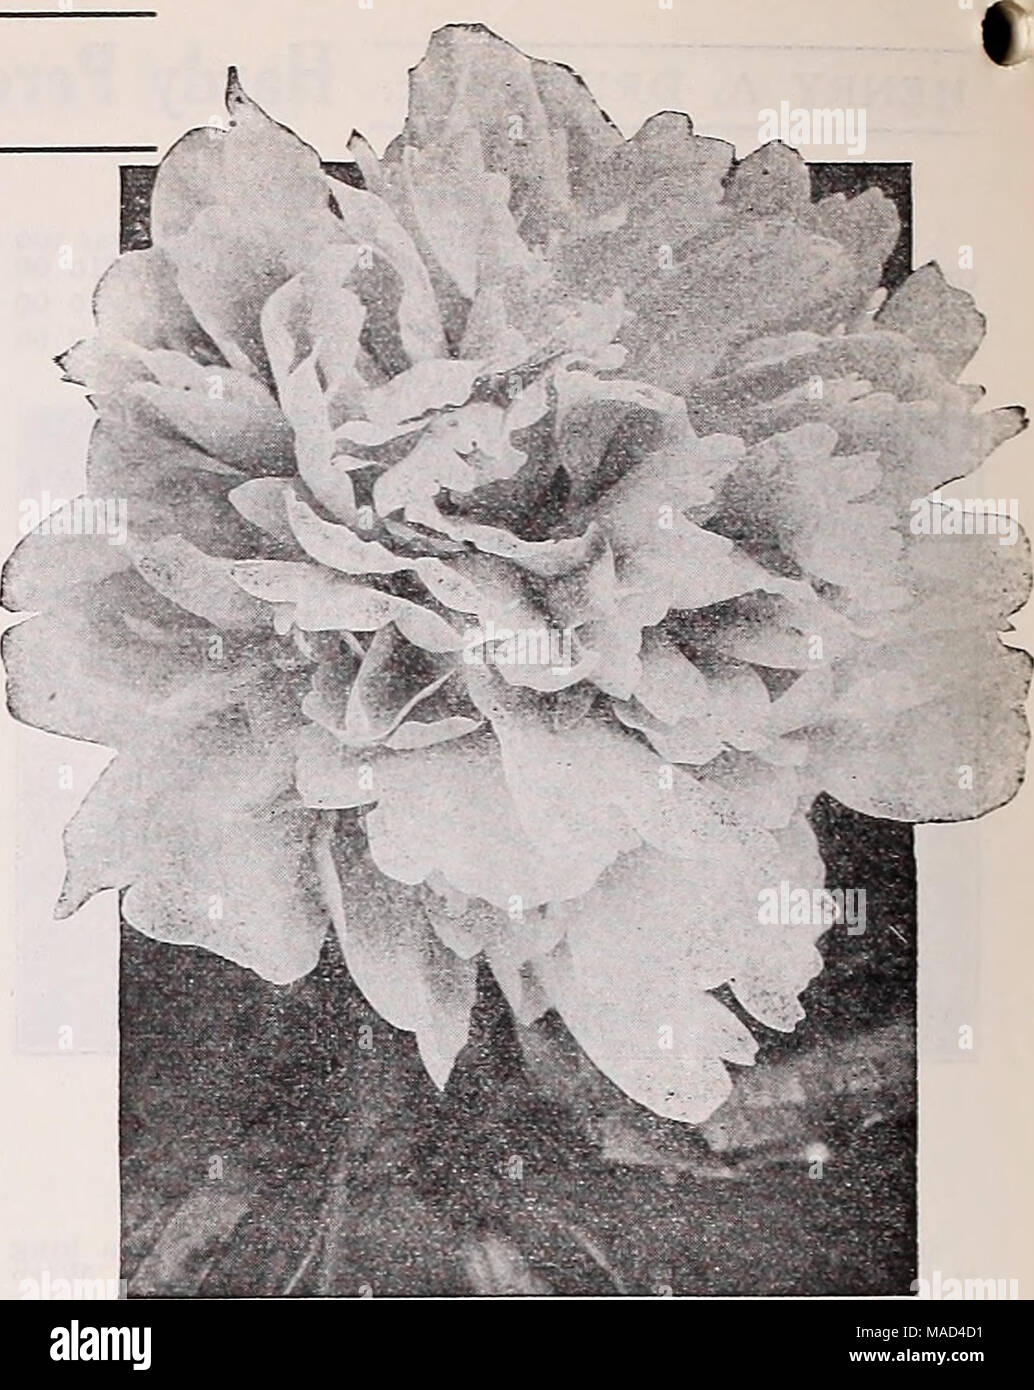 . Dreer's wholesale catalog for florists and market gardeners : 1940 winter spring summer . Double Herbaceous Peony Double Herbaceous Peonies (Strong Divisions, 3 to 5 Byes) Per doz. Per 100 Avalanche (8.7). One of the very best of the white Peonies. Late and a very prolific bloomer. A fine cutflower. . $3 00 $20 00 Bdnlis Saperba (7.6). This is the only Peony offered that is rated under 8. and there is no reason why it should carry this low rating as it is really a good Peonyâearly, free-flowering, and a fine cutflower in the dark pink class 2 75 Pelix Cronsse (8.4). Late, mid-season red Peon Stock Photo